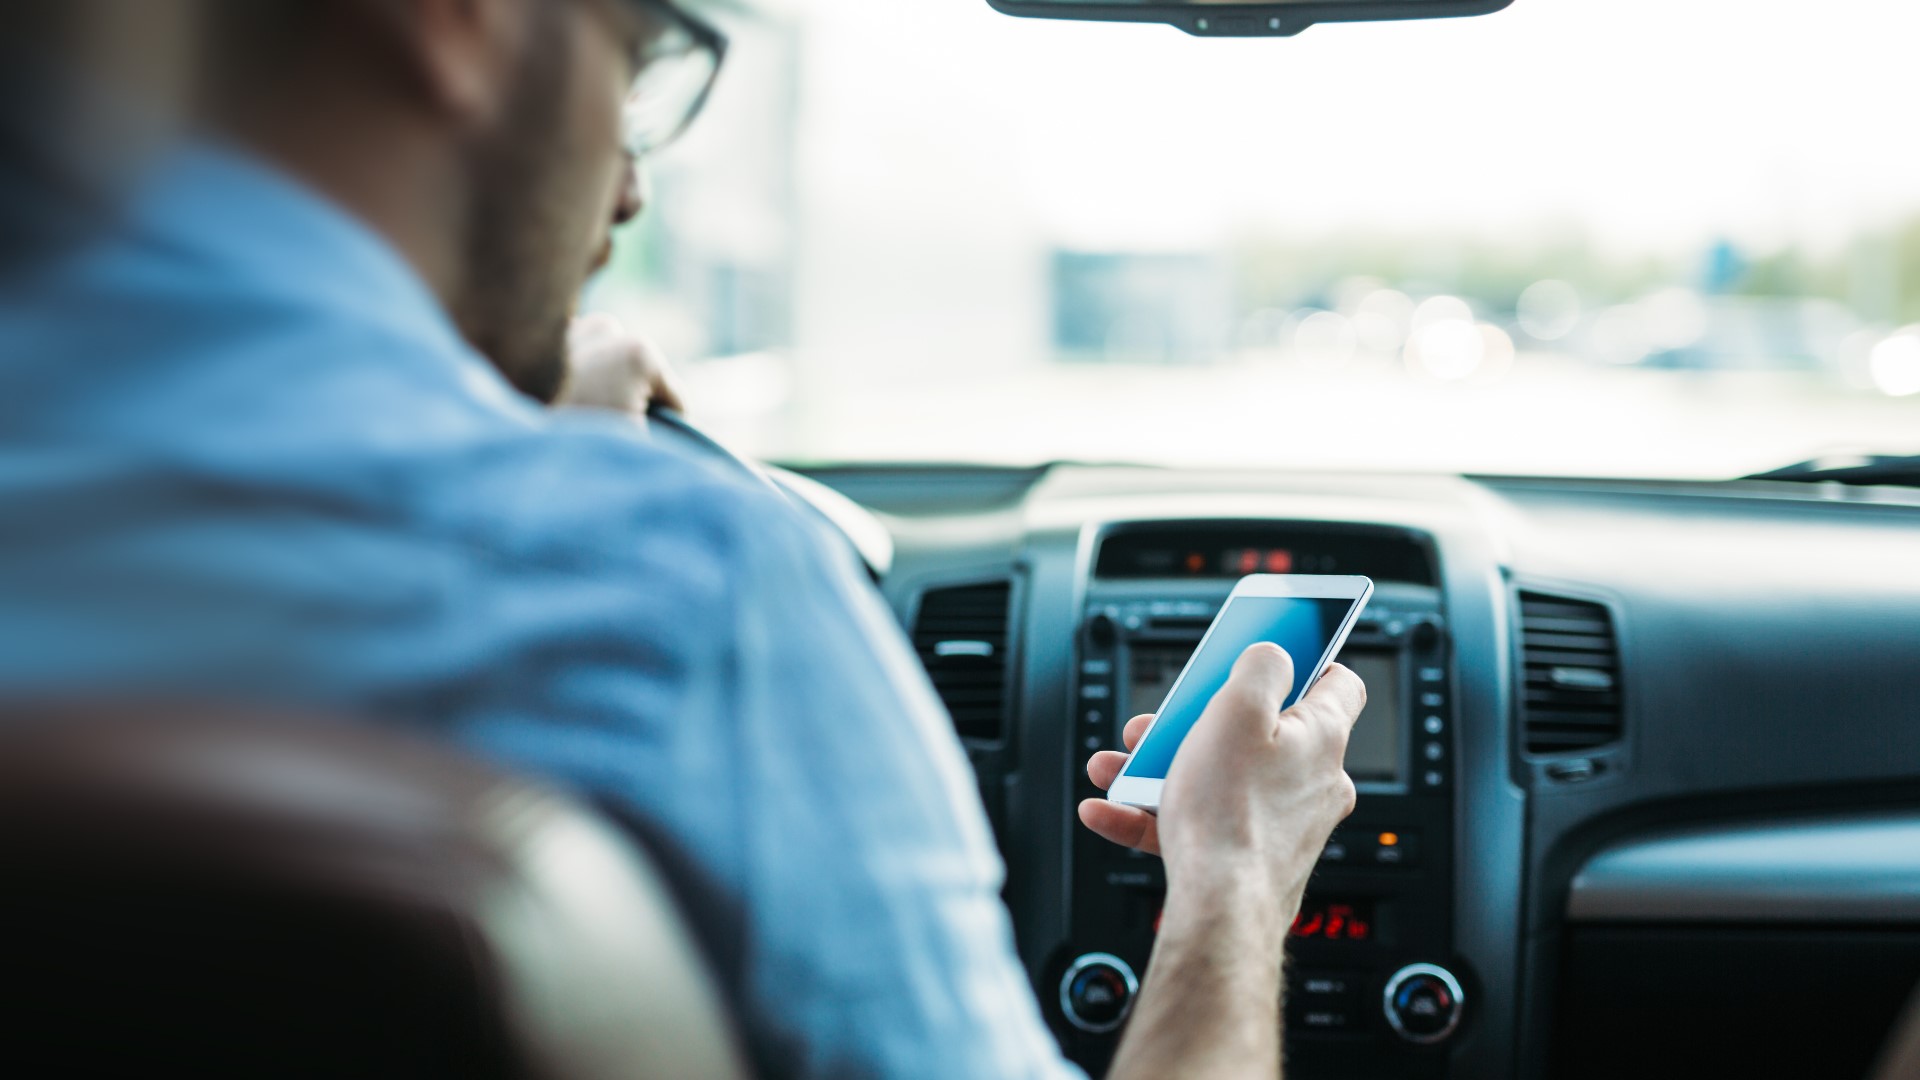 The bill would prohibit cellphone usage while driving unless the driver were to be using a hands-free device or voice-activated mode.